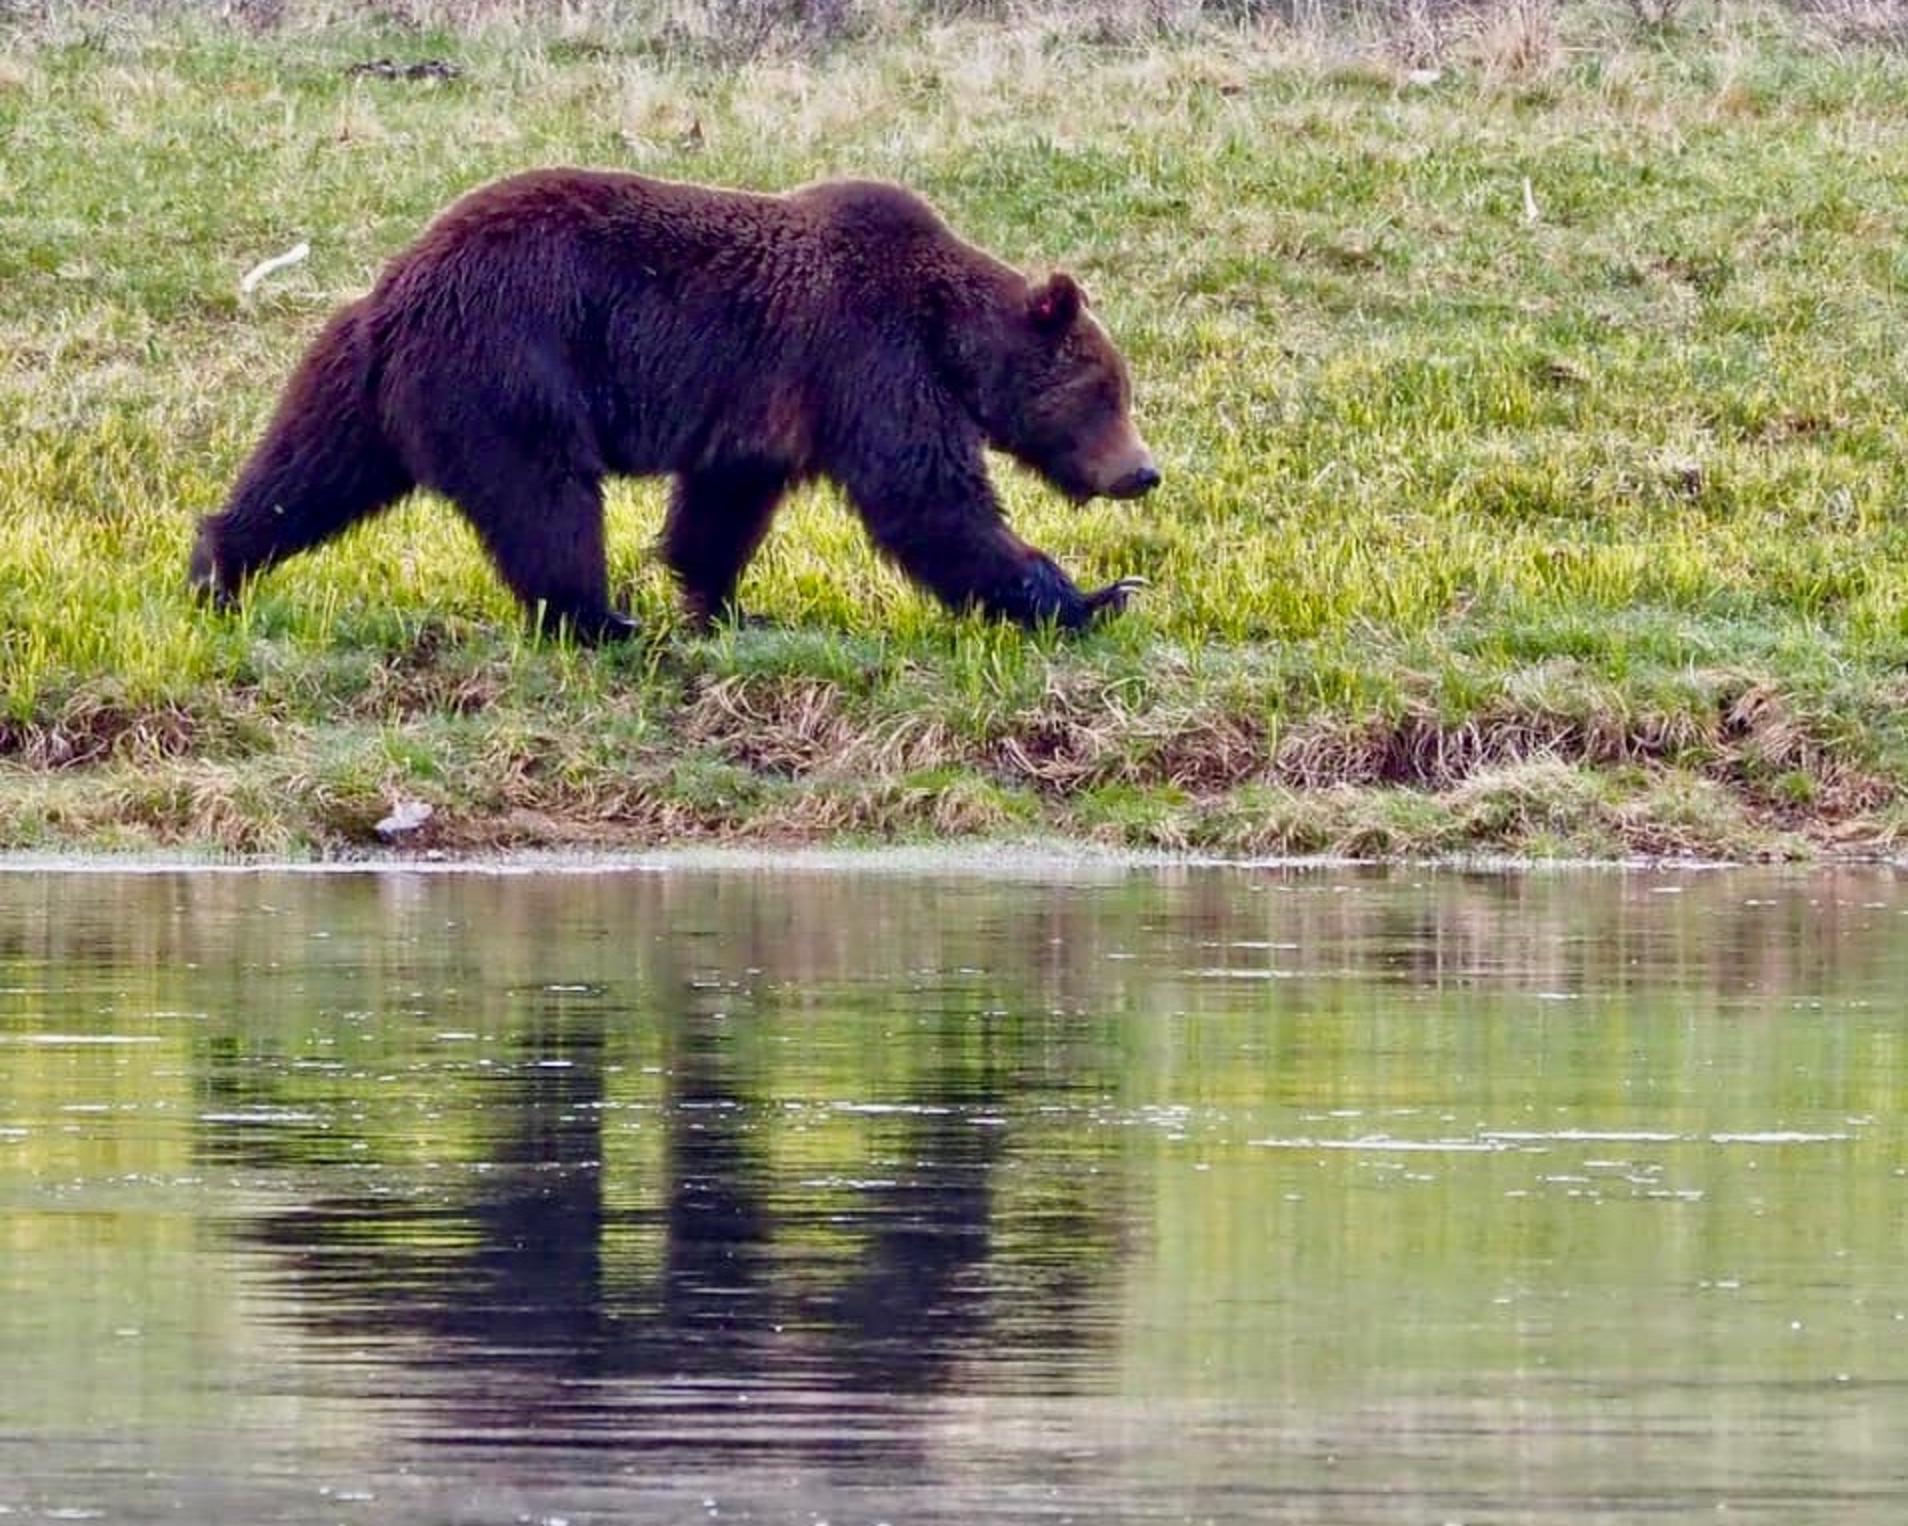 A grizzly bear in Yellowstone: what does the reflection of wild nature say about us? How do we approach the places we love with respect?  Photo courtesy Golding/Bumann 